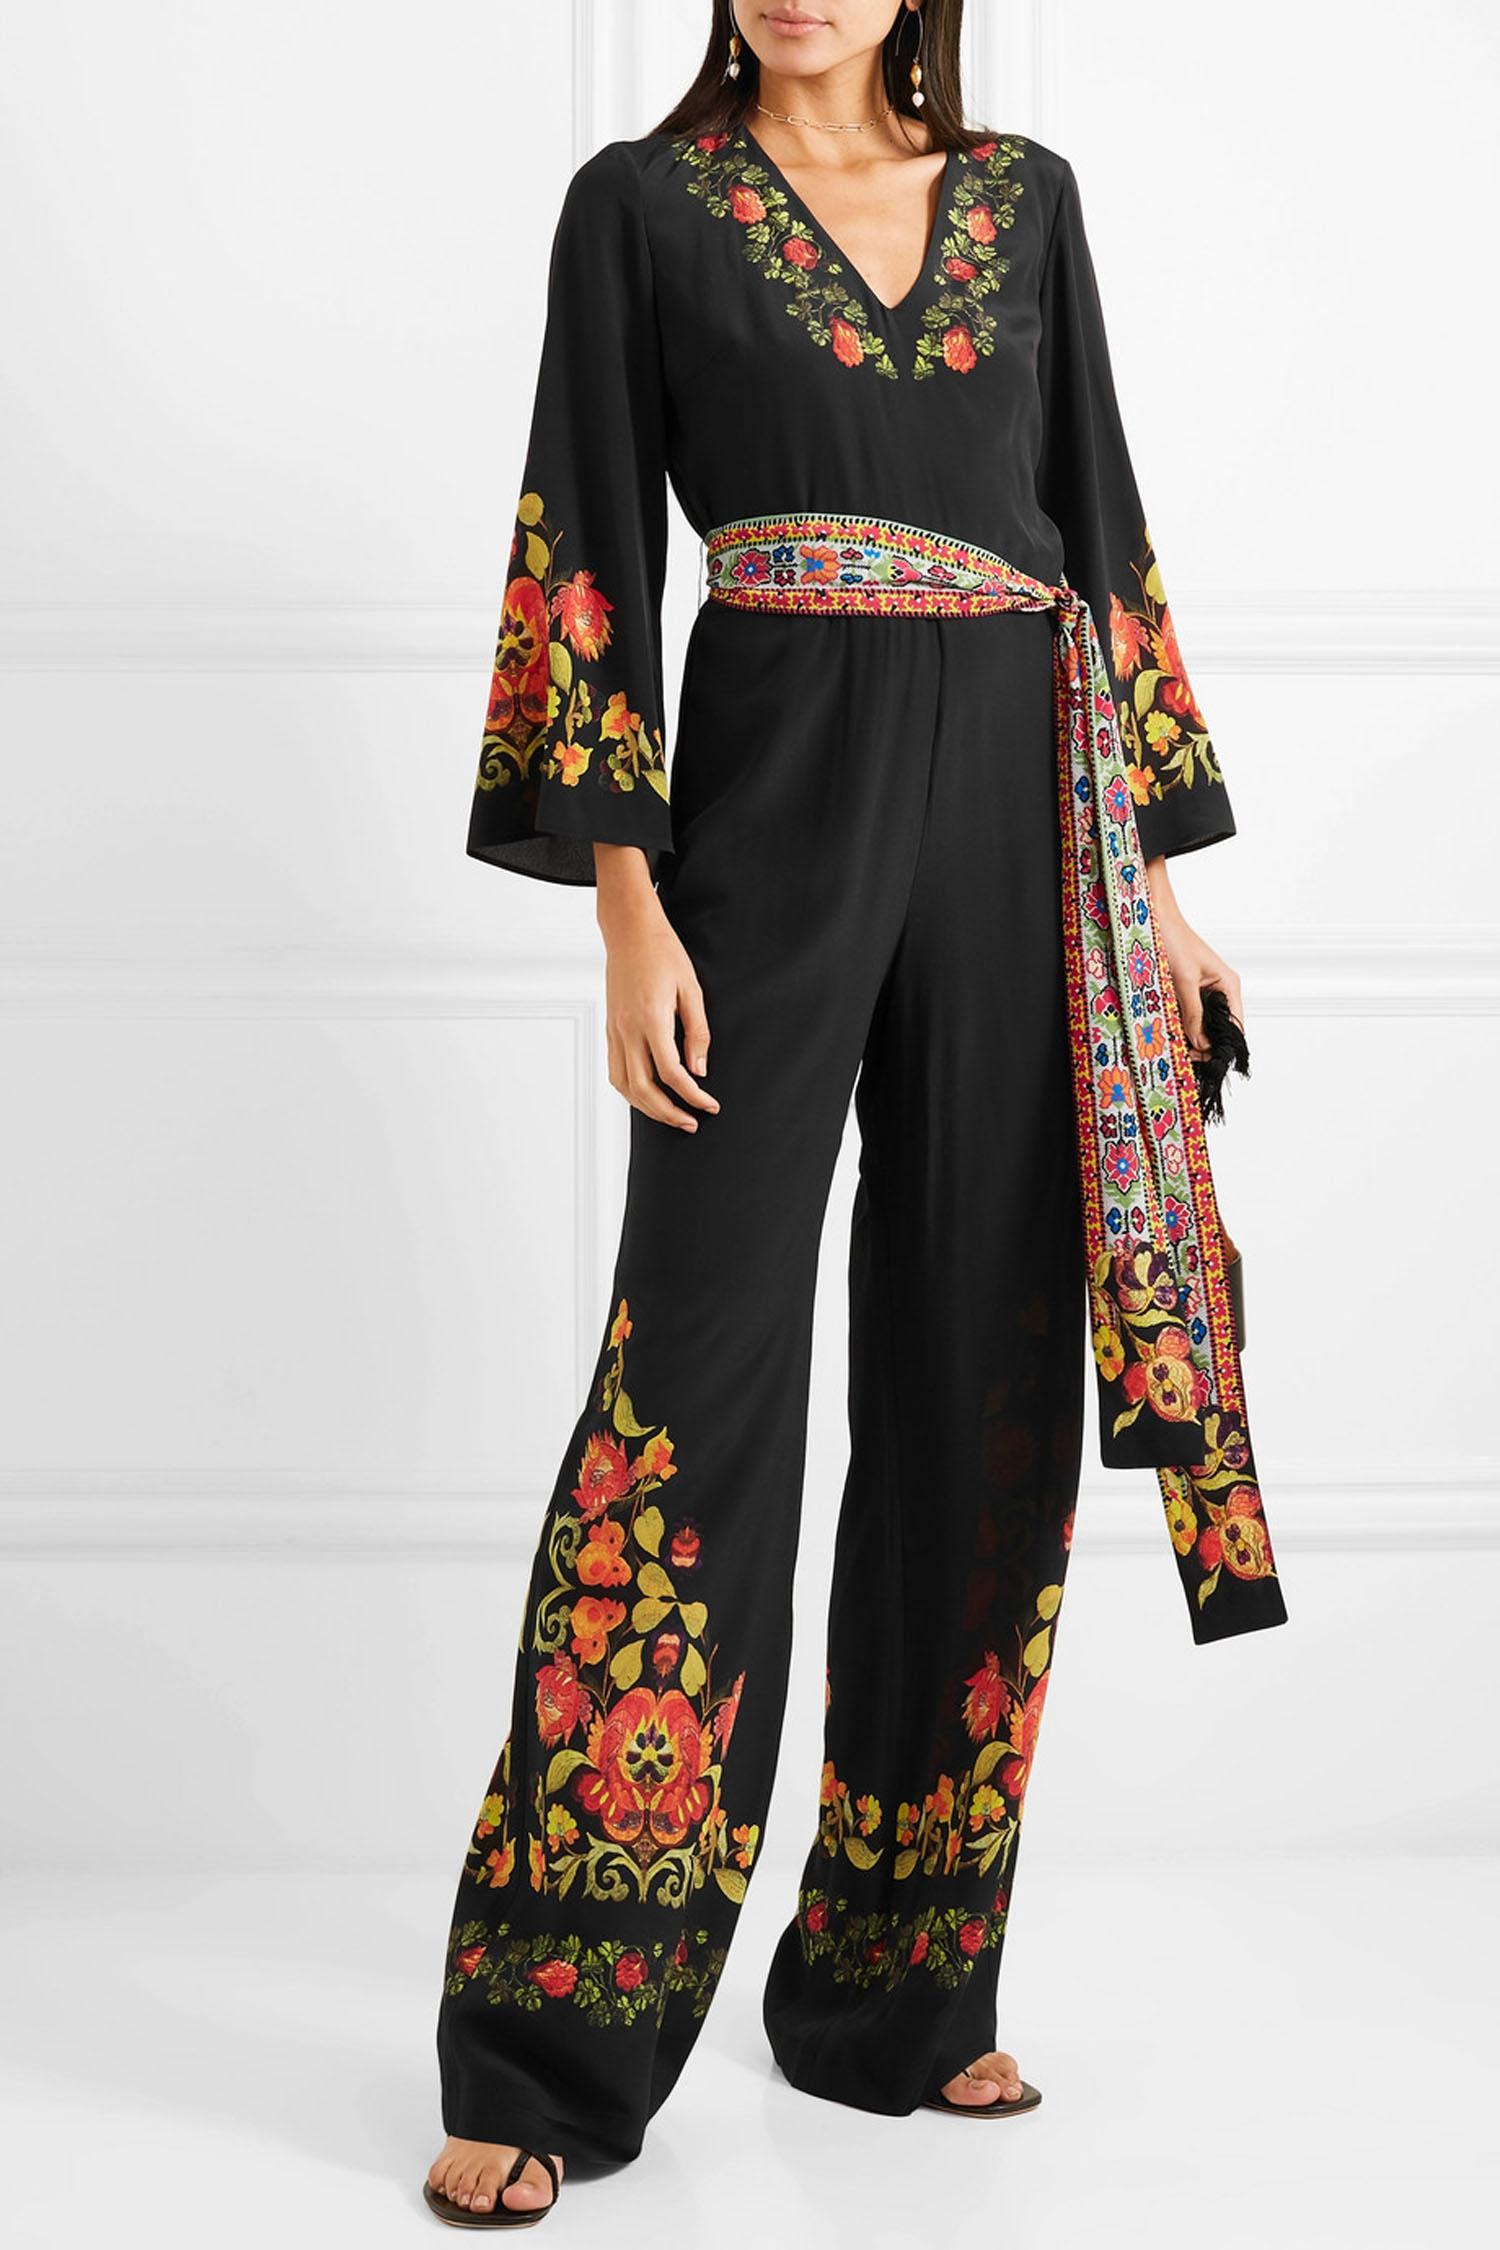 New ETRO Printed Silk Crepe de Chine Jumpsuit
Designer size - 38
Designed to be slightly fitted at the bust and waist with wide-leg pants.
Use the tie belt to cinch in at the waist. Two side pockets.
100% Silk. Lightweight, fluid, non-stretchy